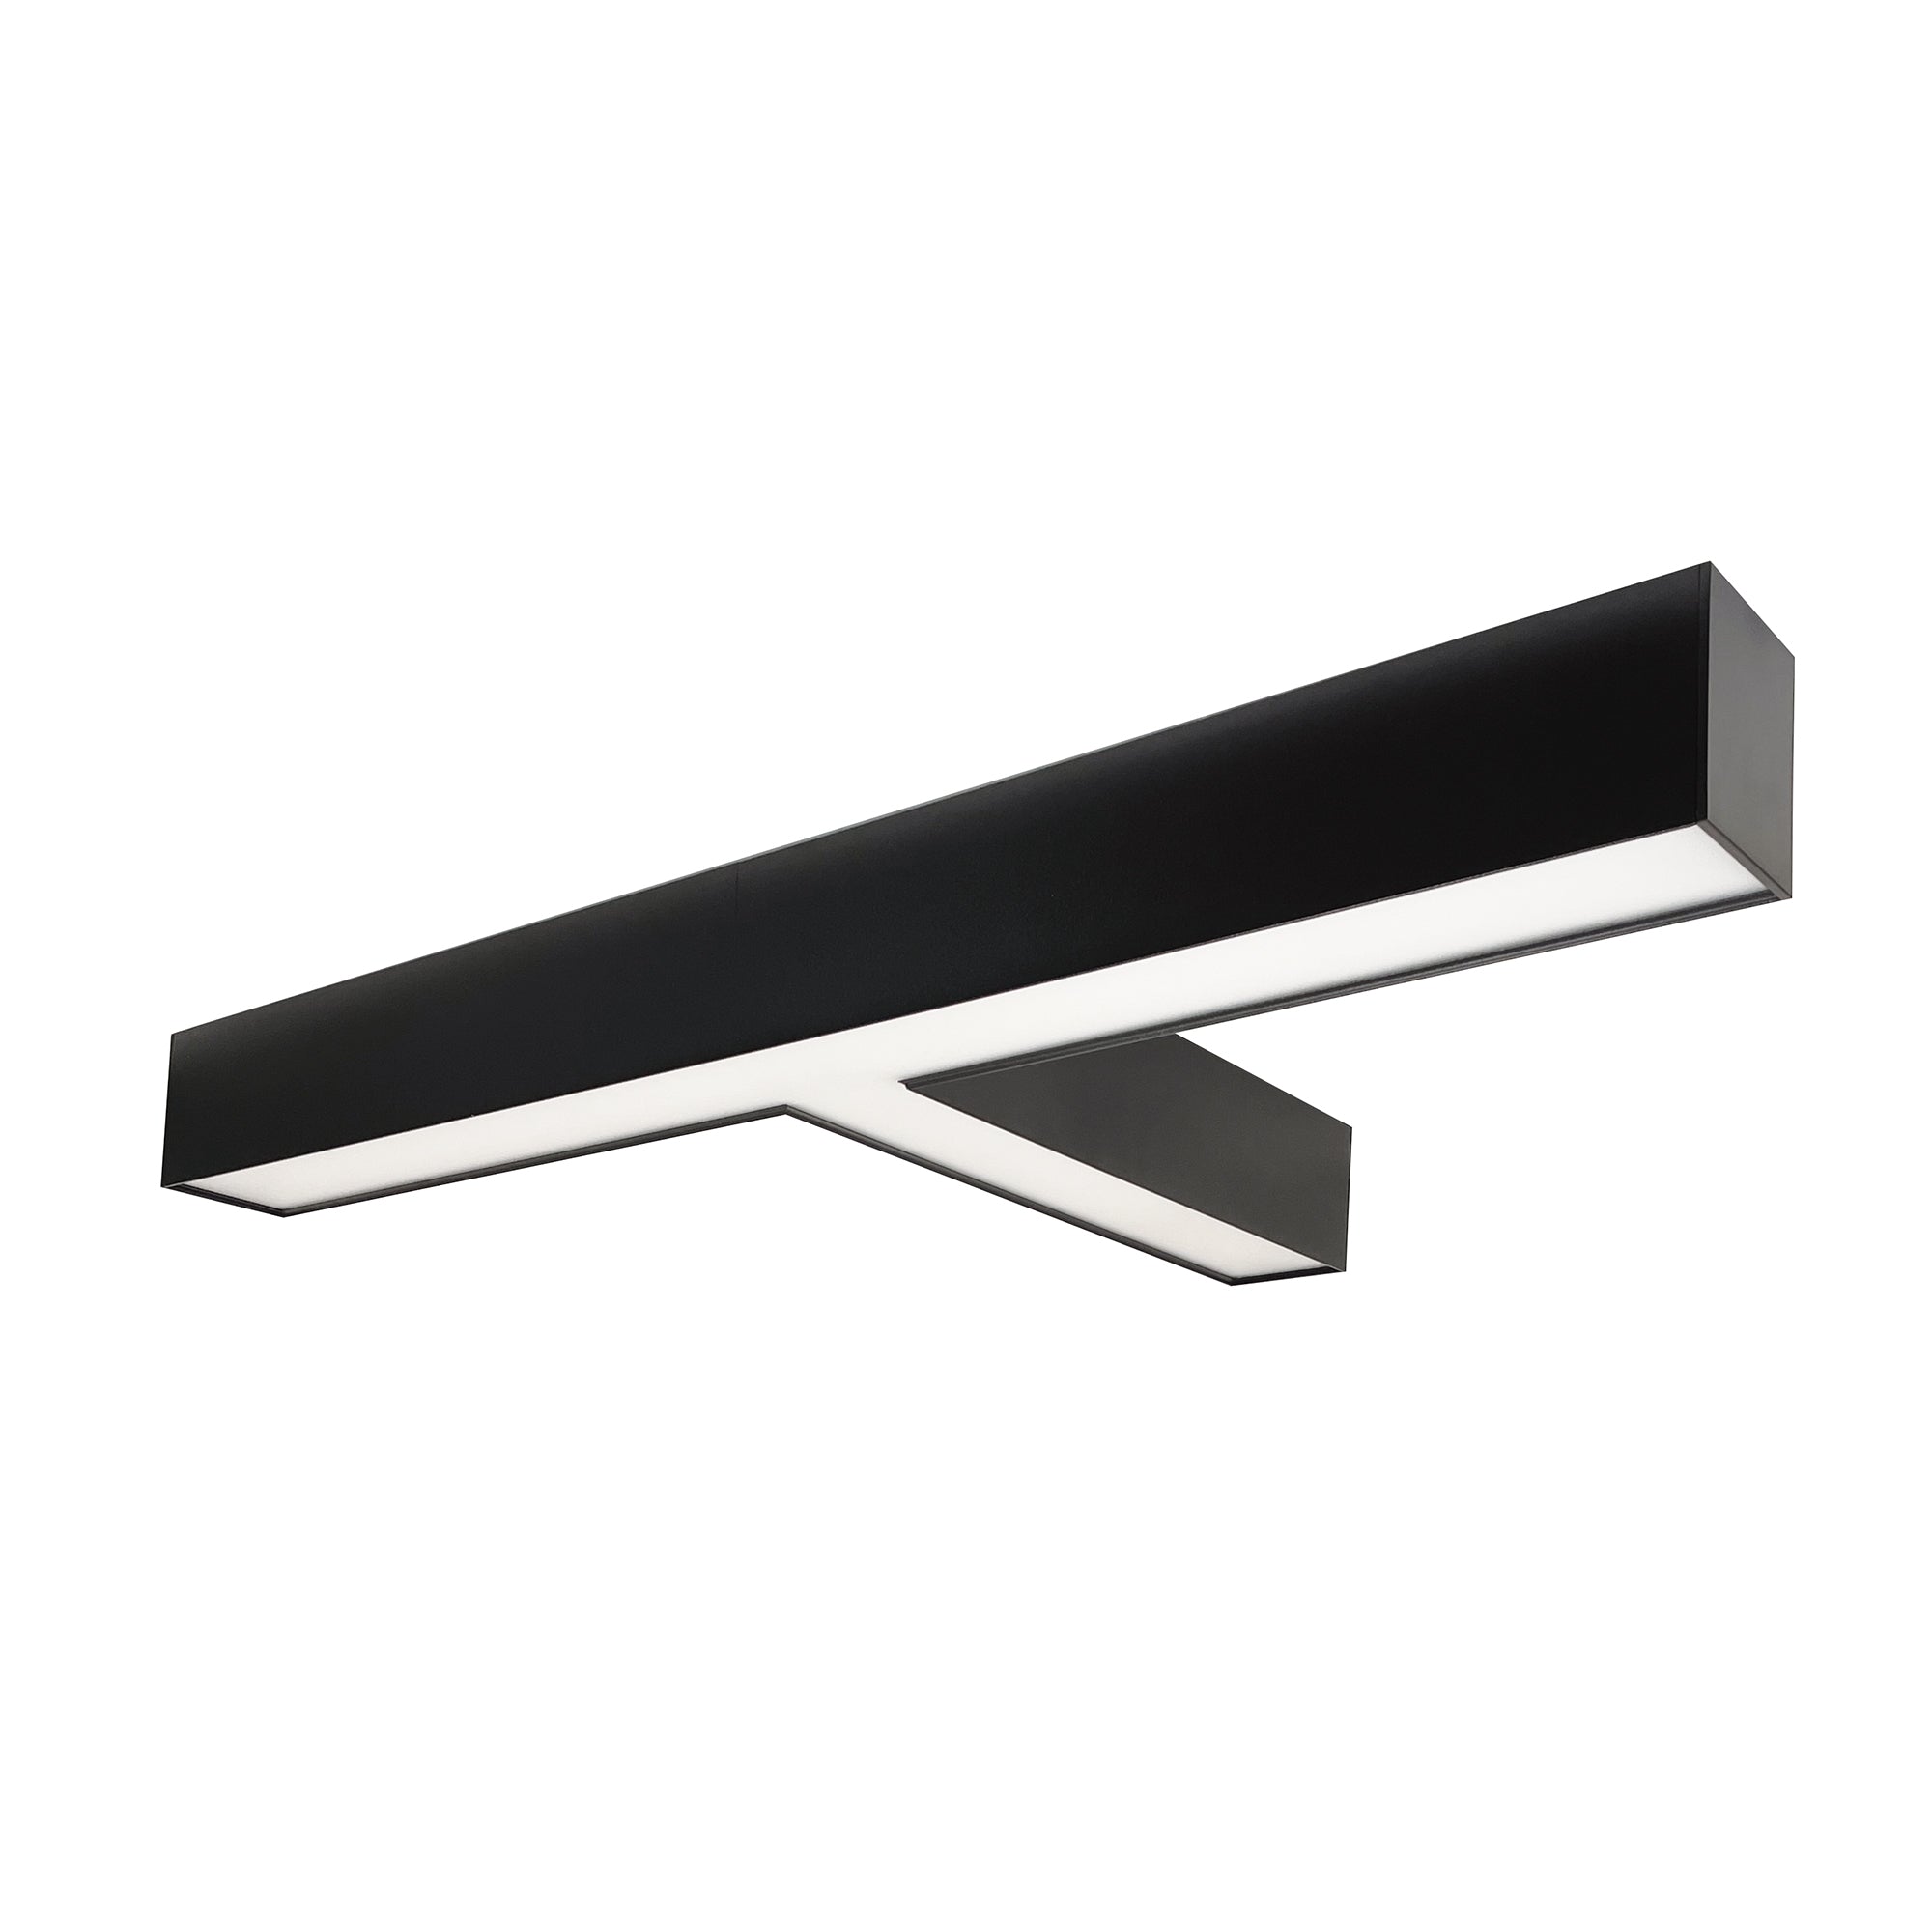 Nora Lighting NLUD-T334B - Linear -  InchT Inch Shaped L-Line LED Indirect/Direct Linear, 5027lm / Selectable CCT, Black Finish